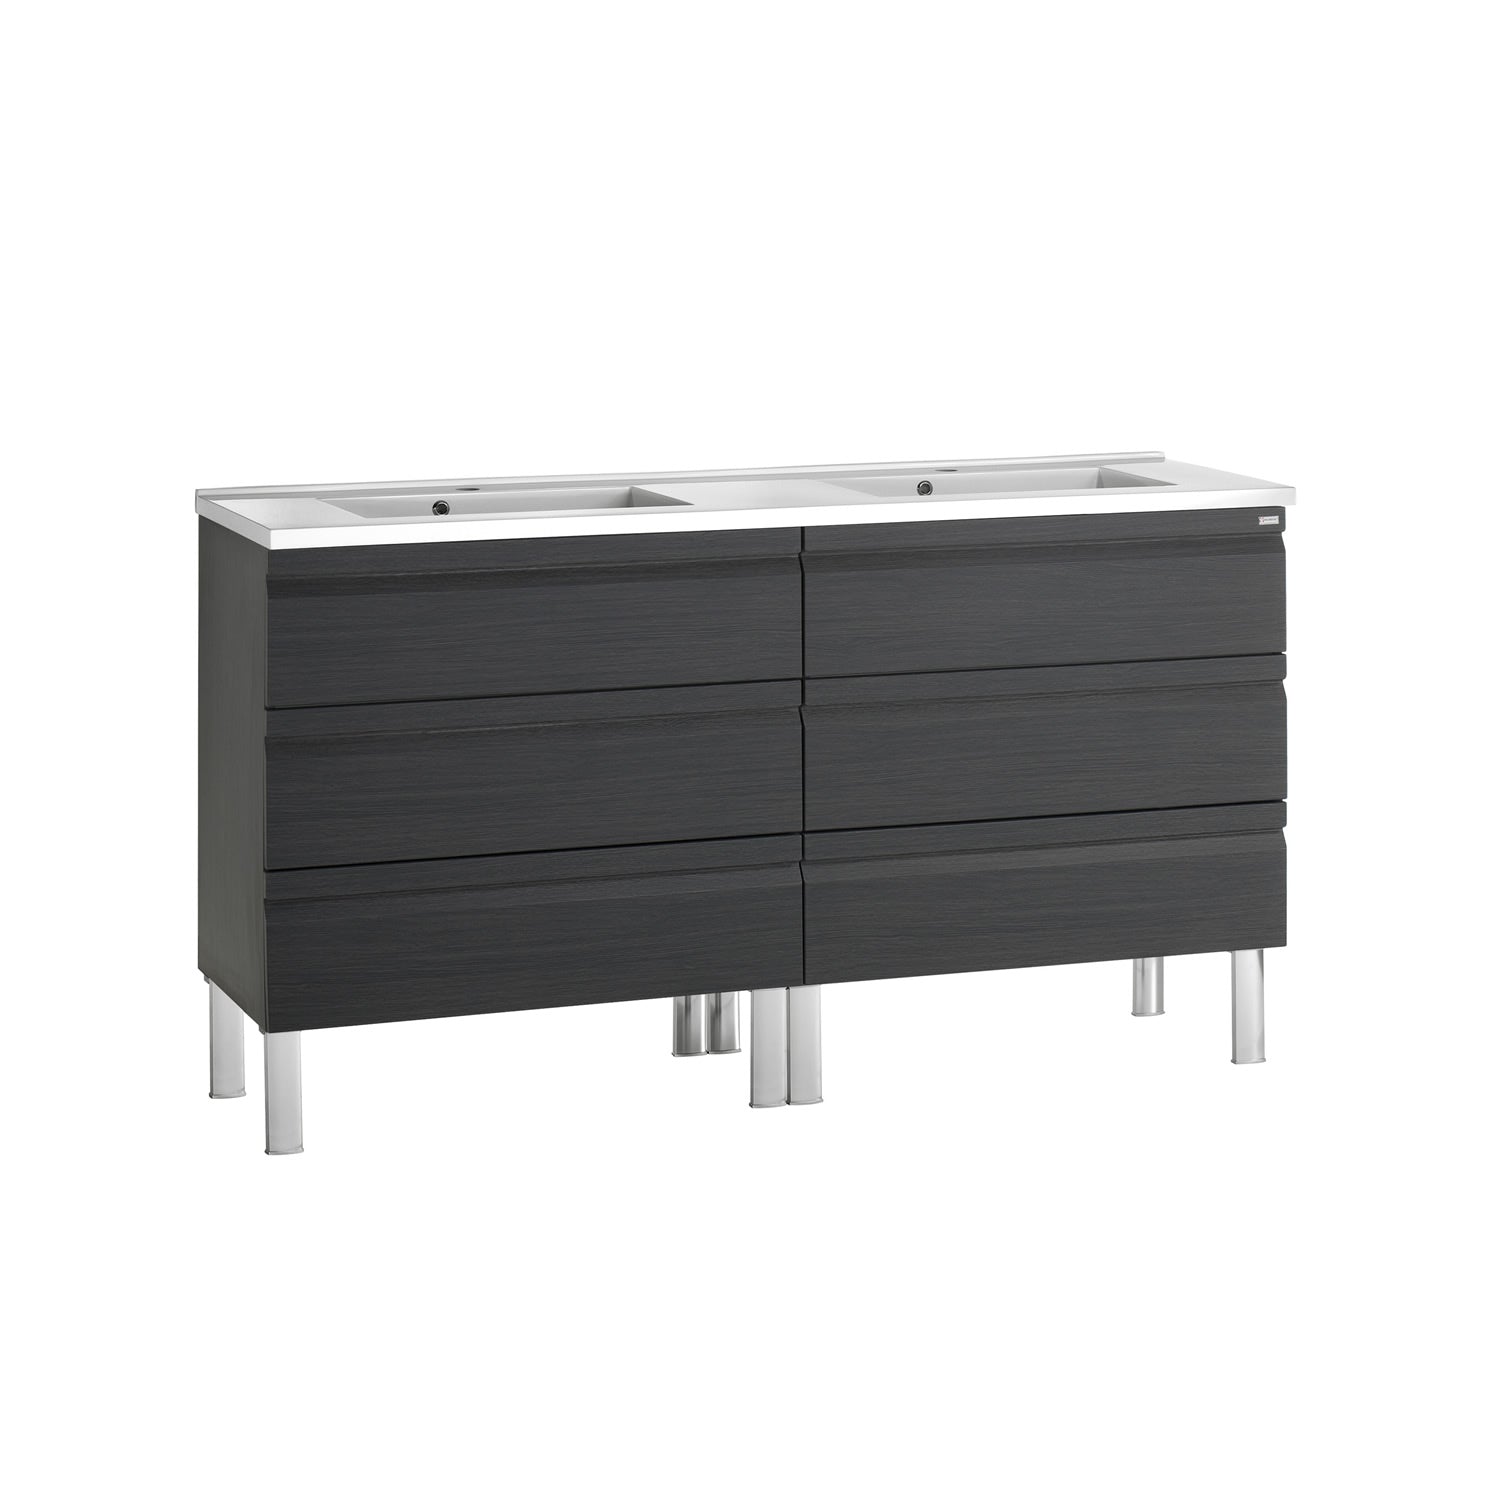 48" Double Vanity, Floor Mount, 6 Drawers with Soft Close, Grey, Serie Solco by VALENZUELA